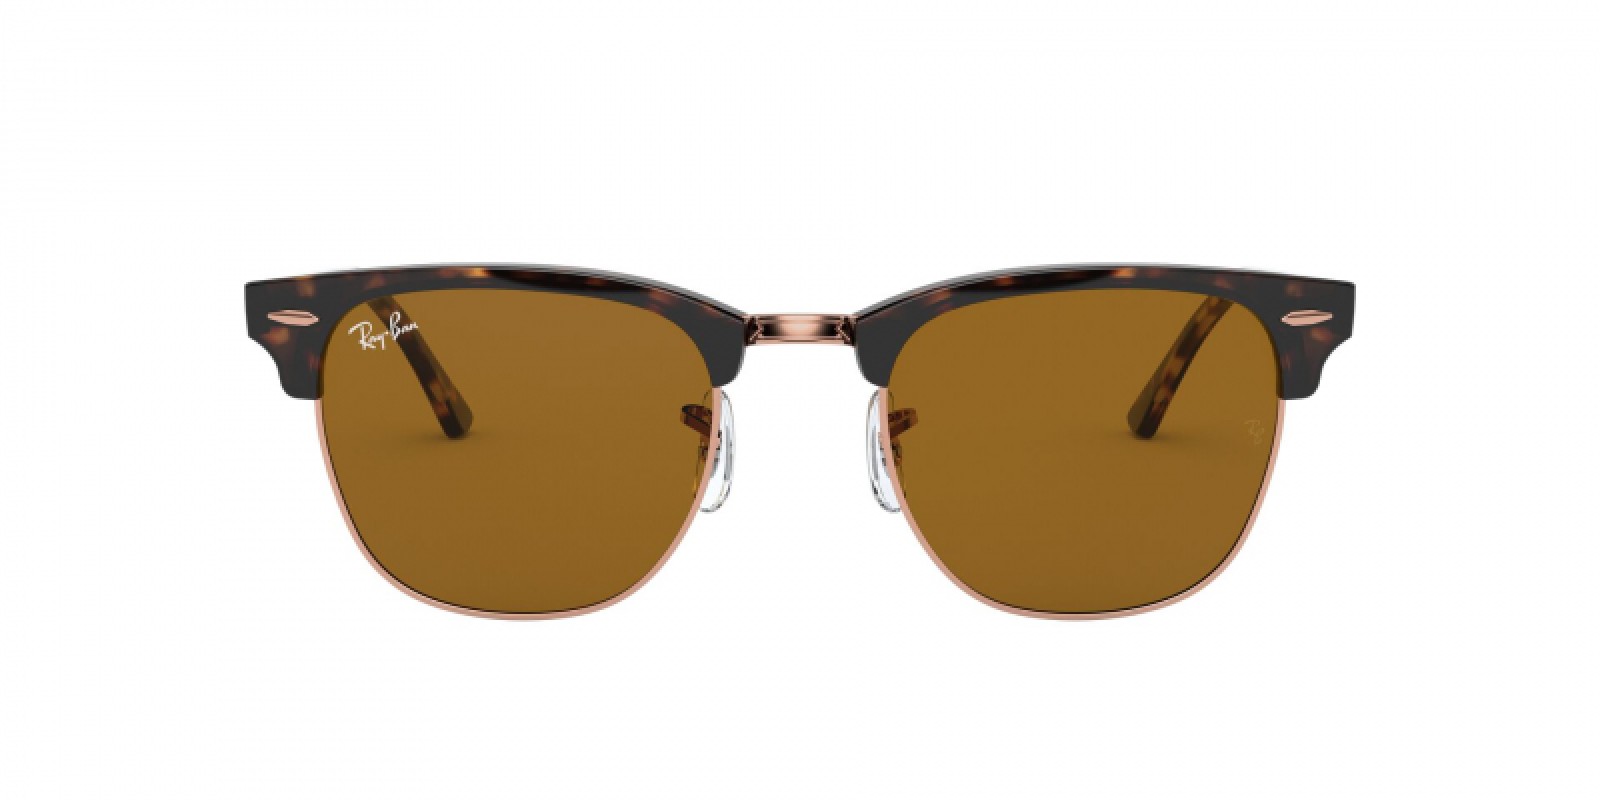 Ray-Ban Clubmaster RB3016 130933